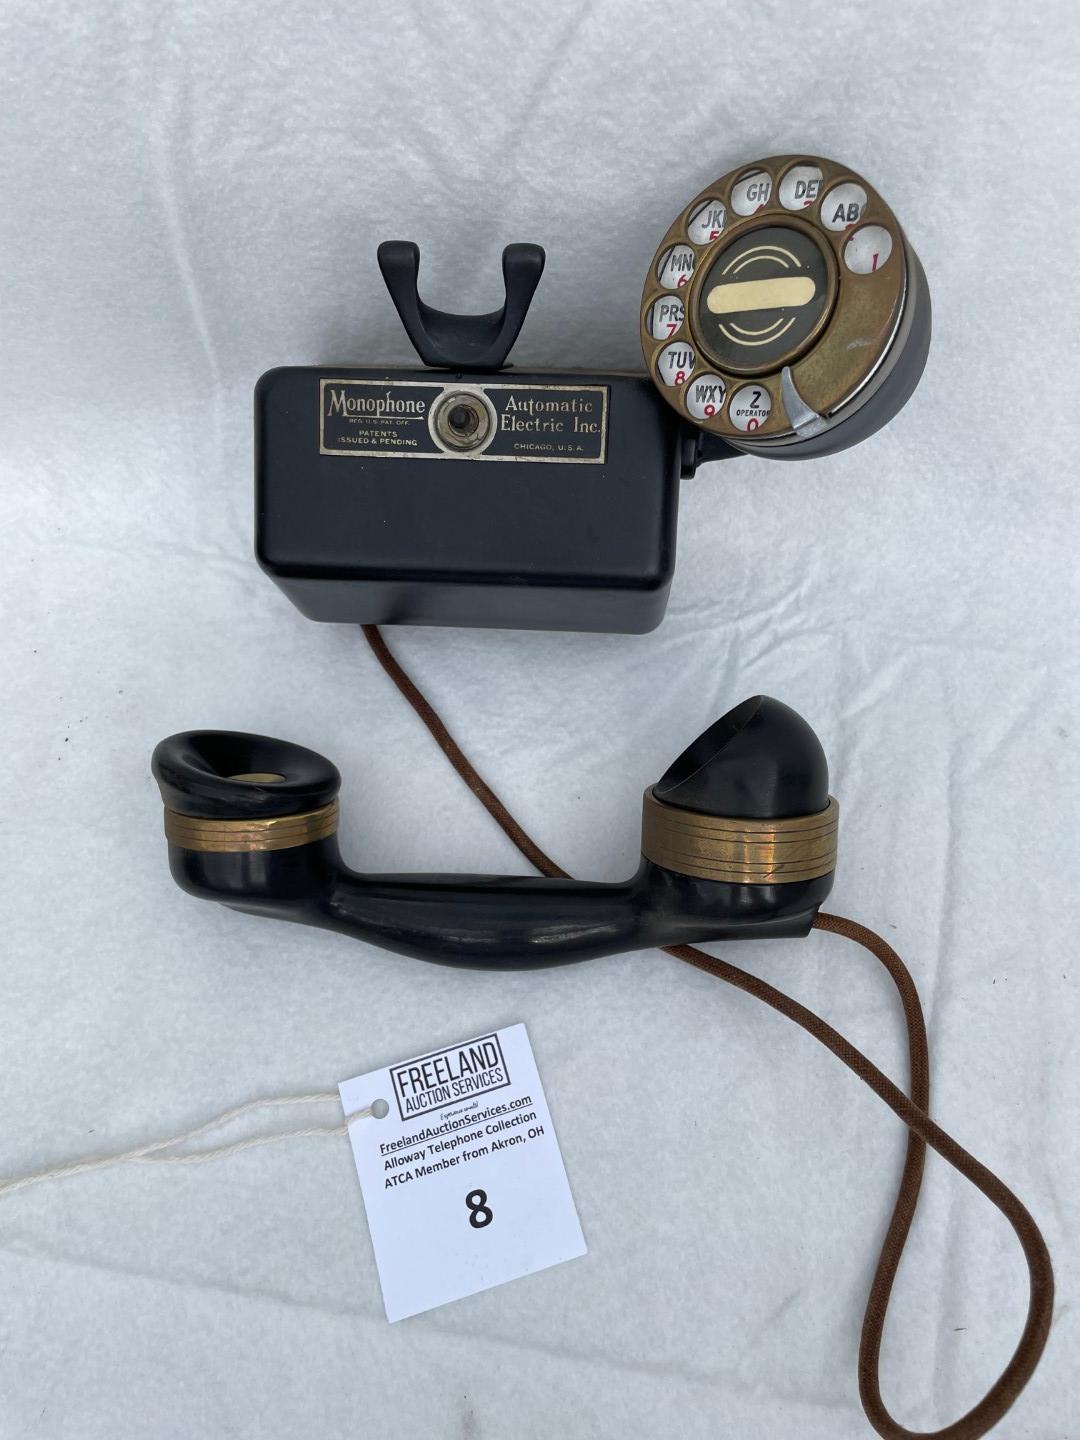 1930s Automatic Electric UNUSUAL MONOPHONE Spacesaver wall telephone